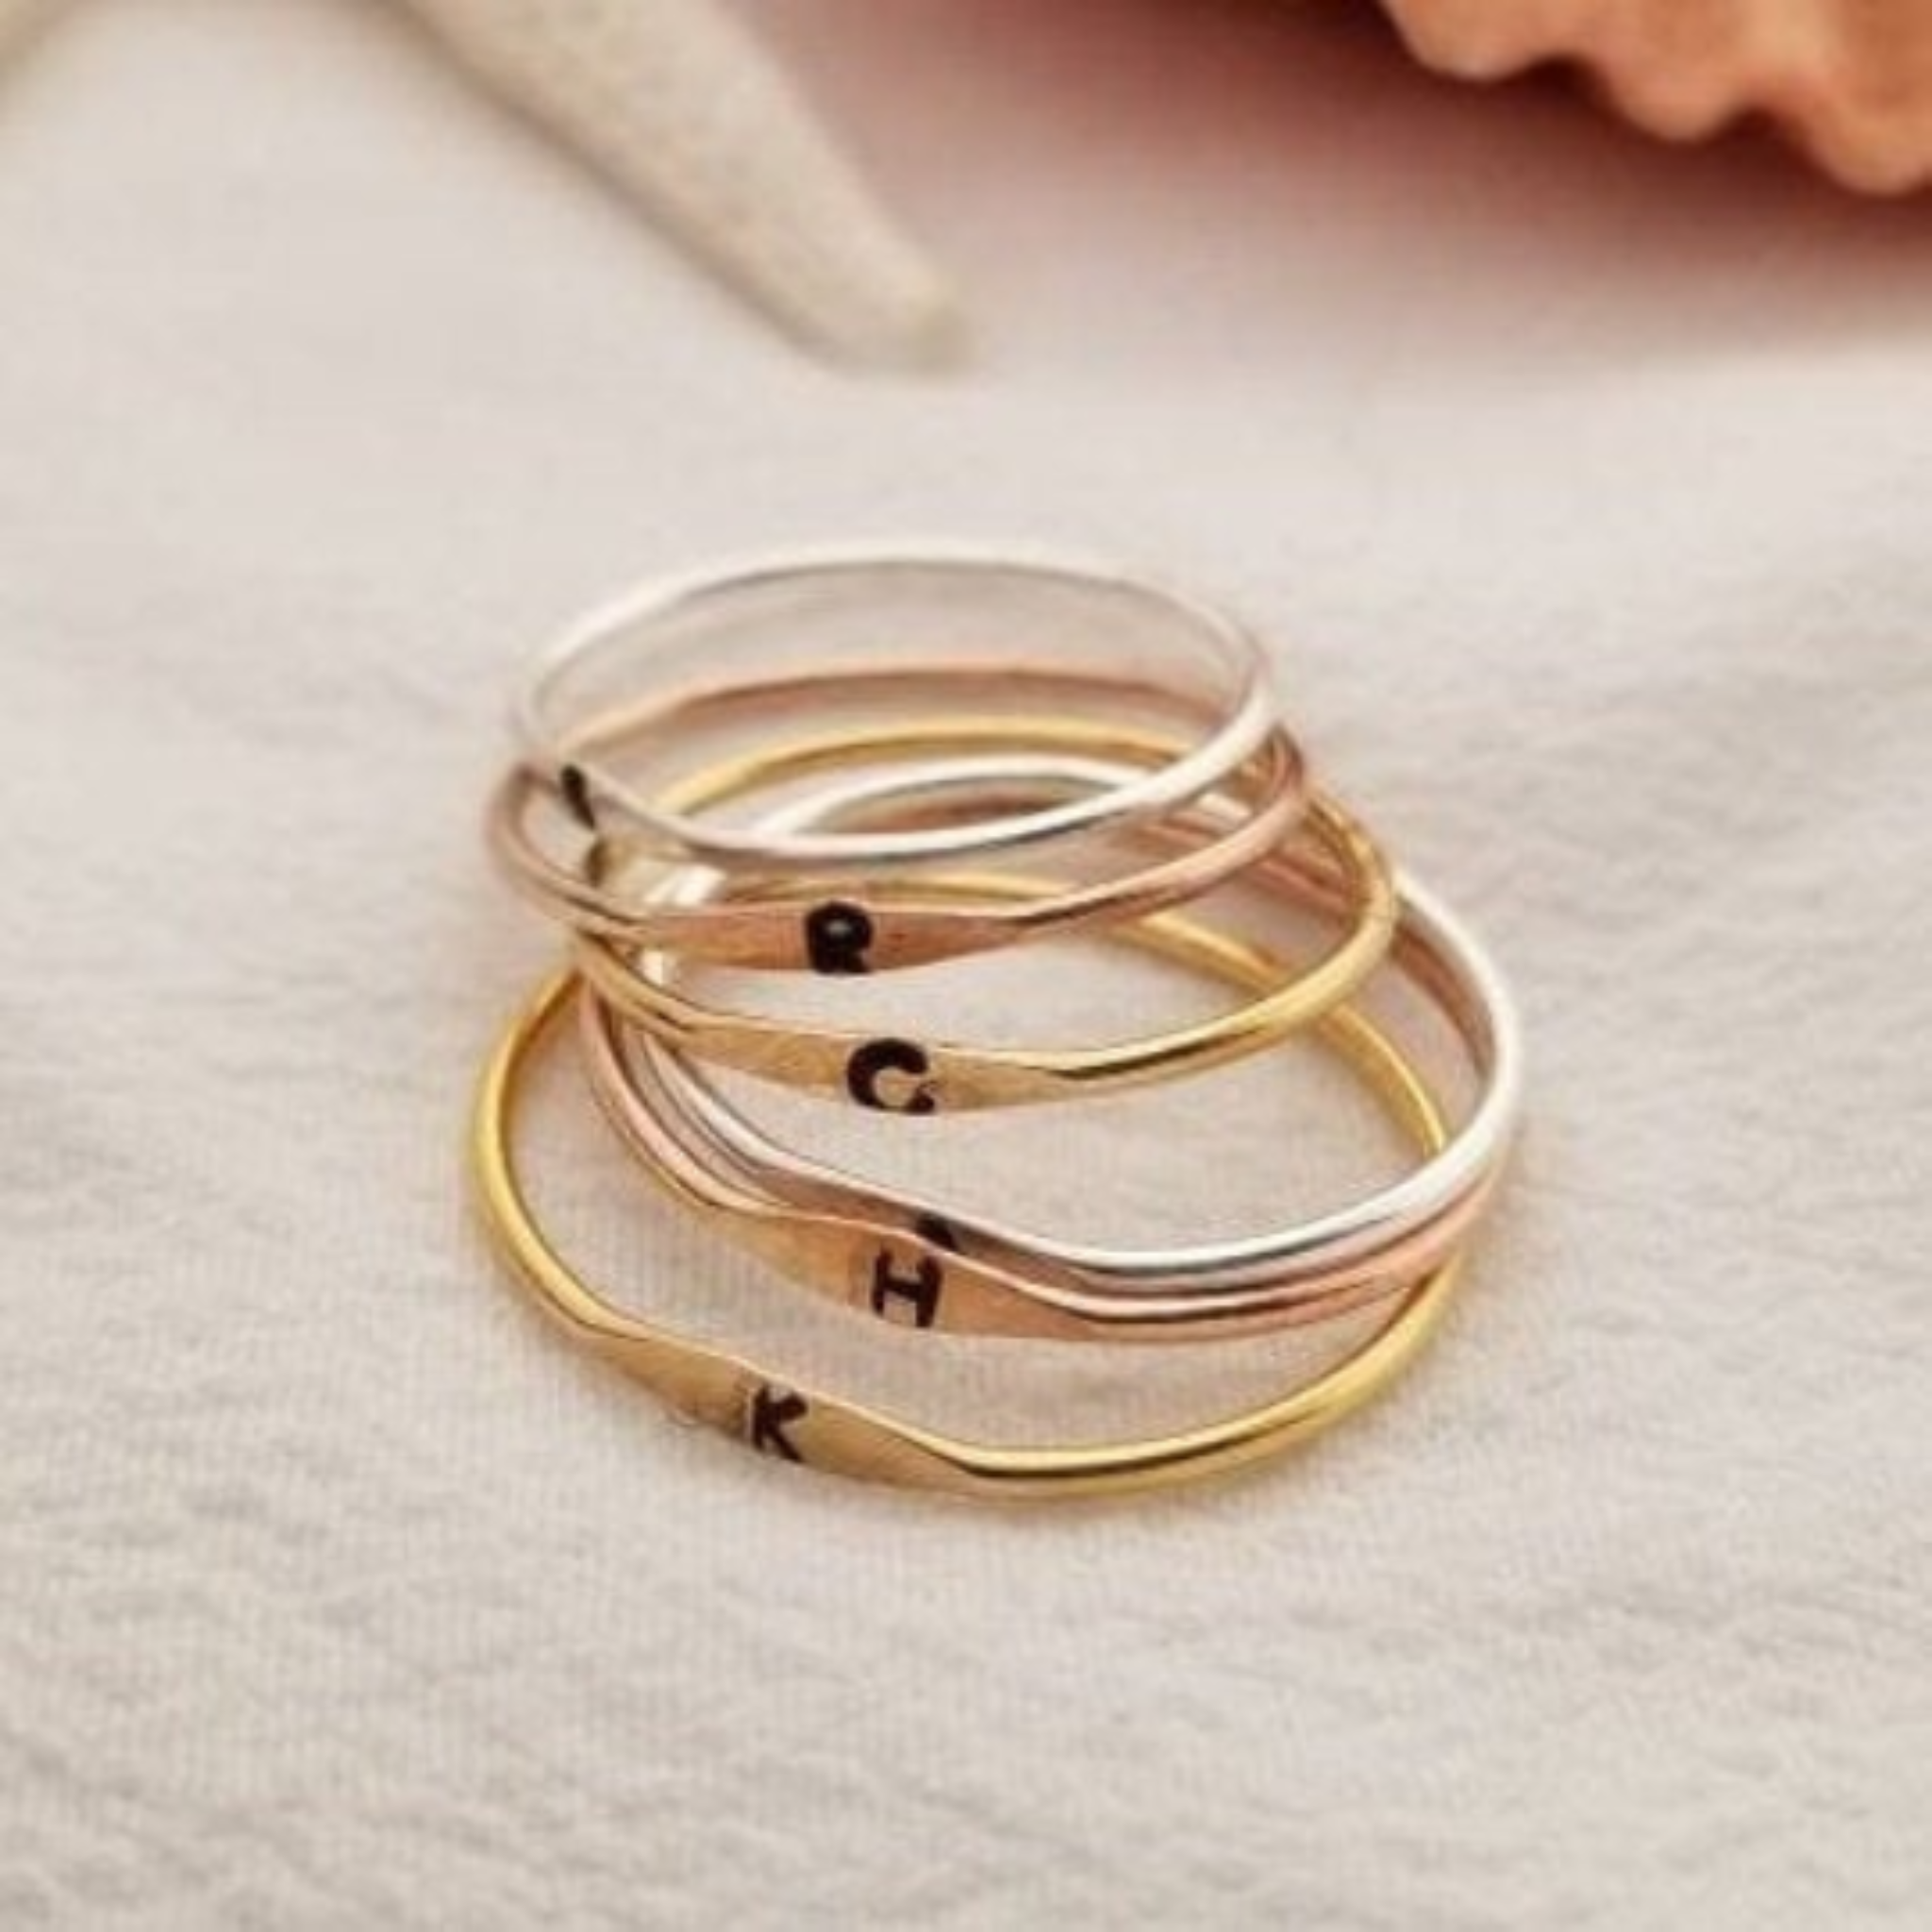 Tiny Personalized Initial Ring - Sterling, Gold or Rose Gold